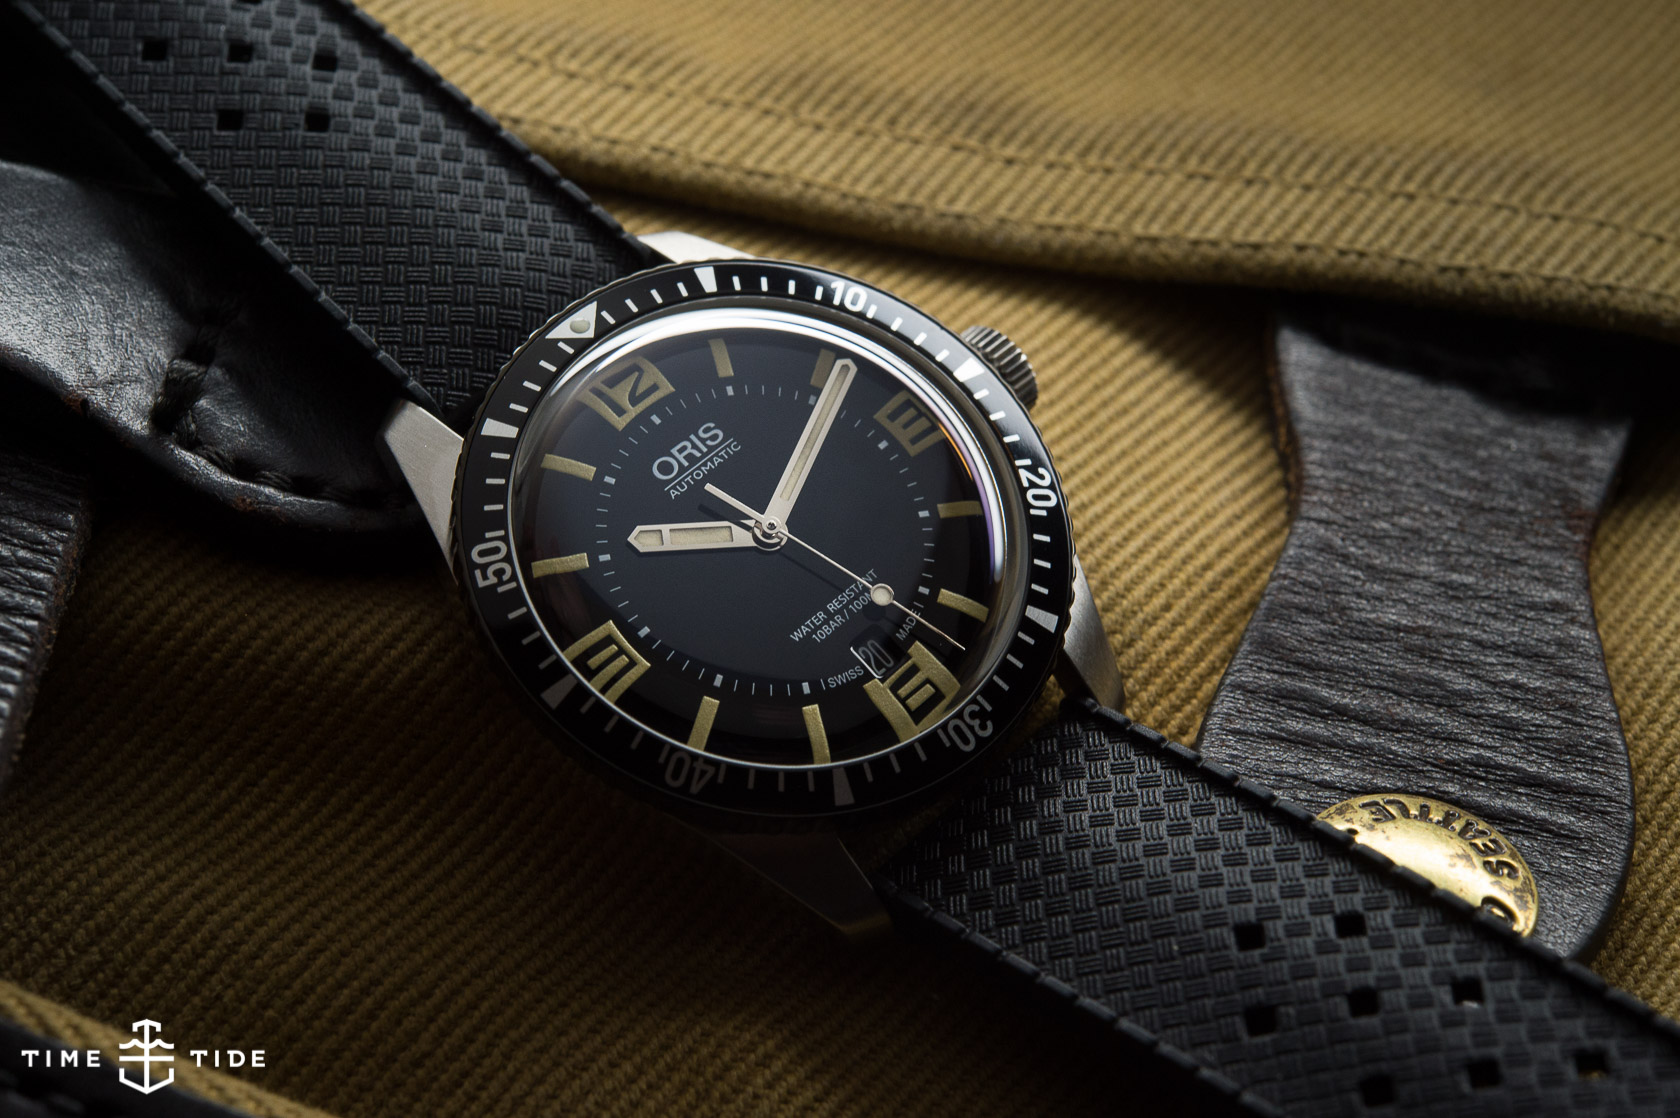 Oris Divers Sixty-Five – Hands-on Review